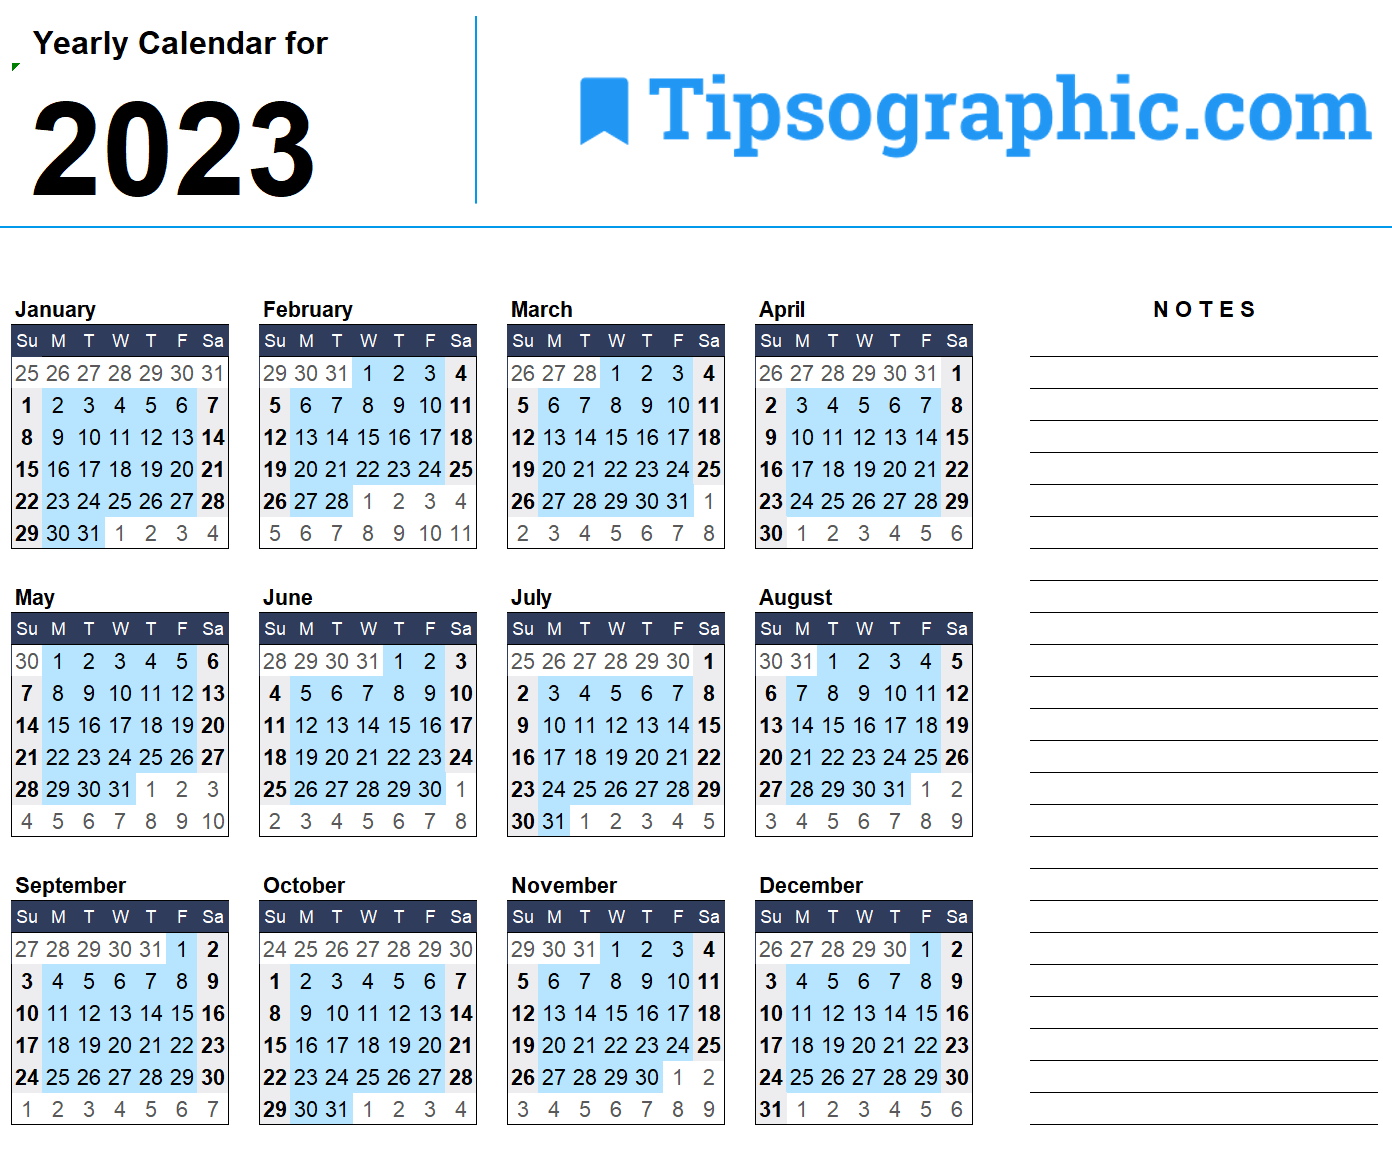 Calendar With Weeks Numbered 2023 - Time and Date Calendar 2023 Canada